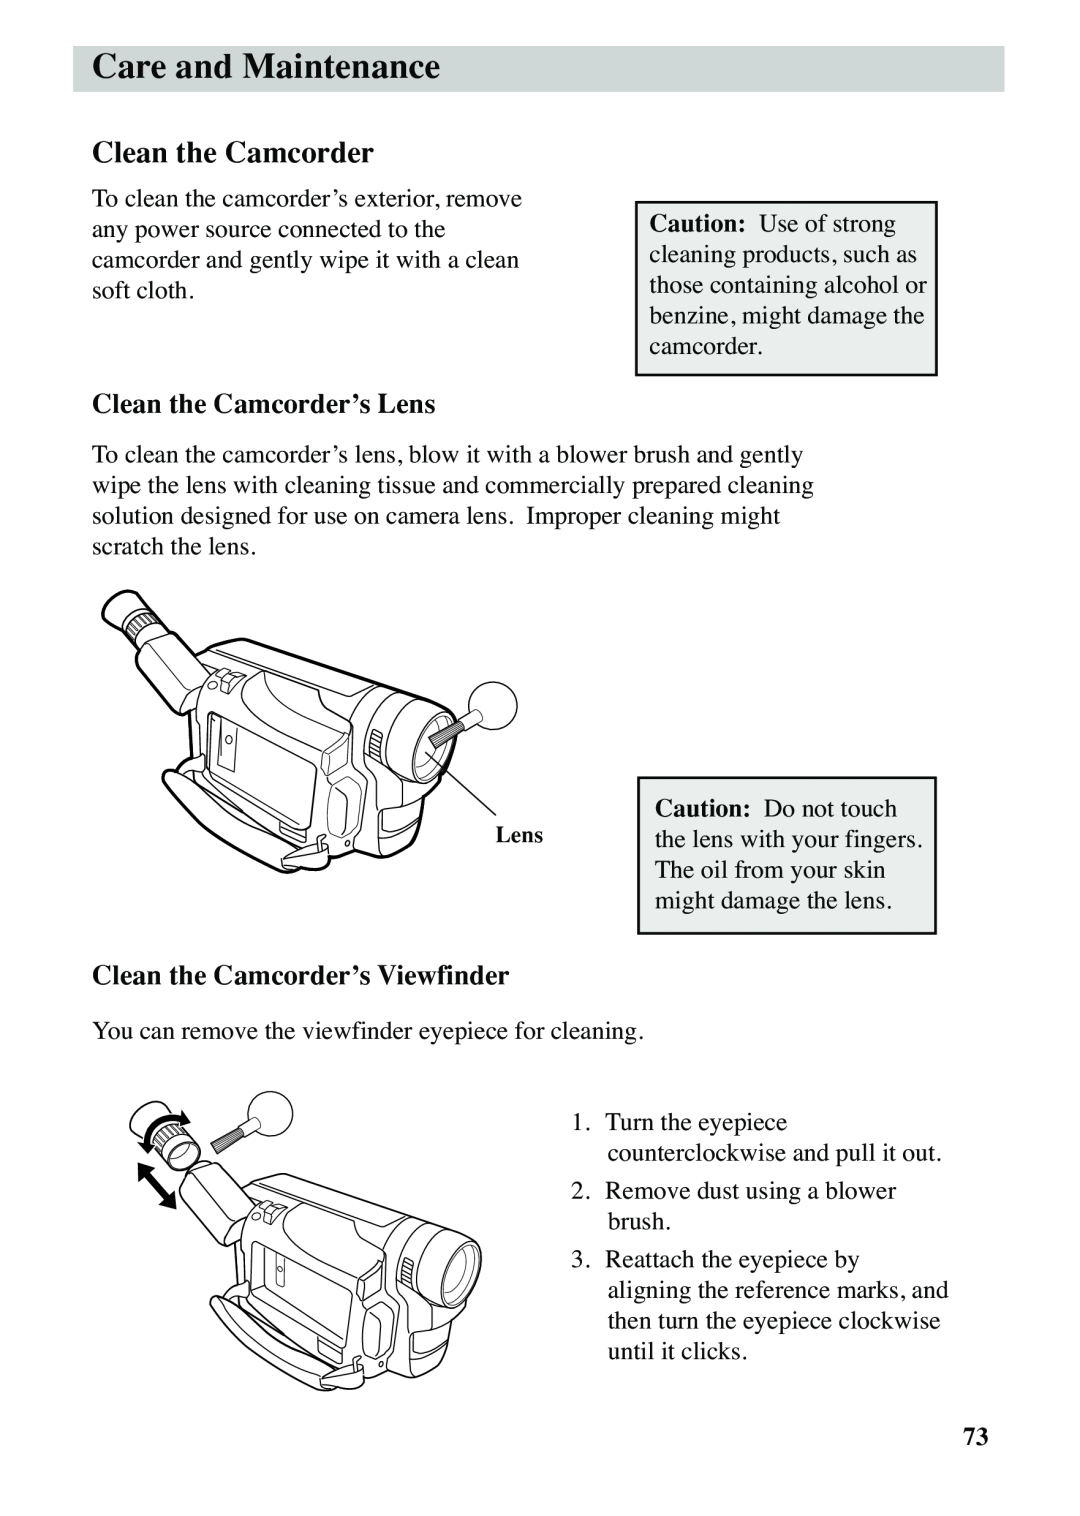 RCA CC6263 manual Care and Maintenance, Clean the Camcorder’s Lens, Clean the Camcorder’s Viewfinder 